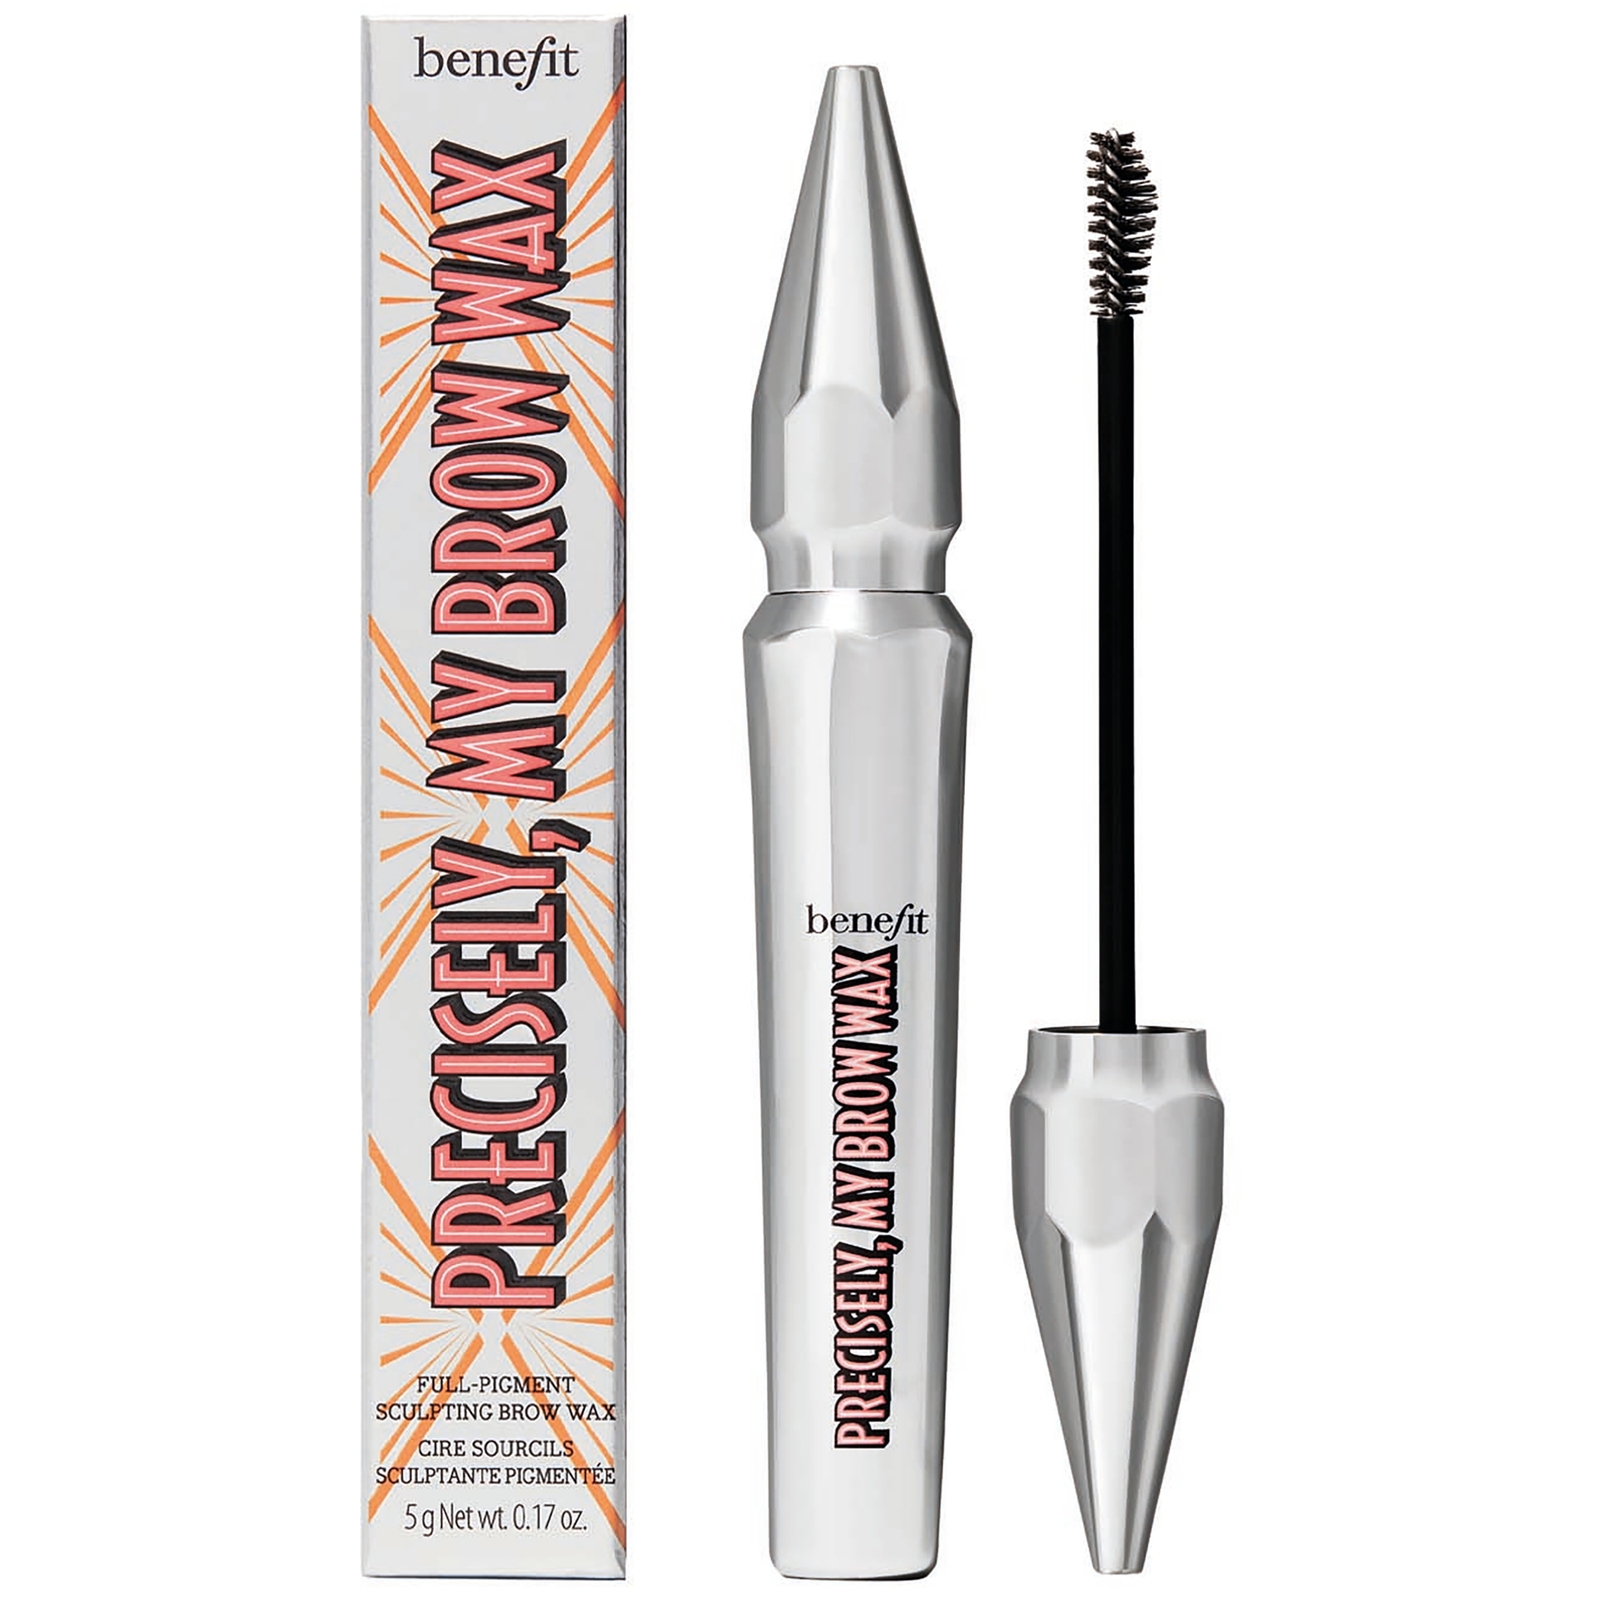 benefit Precisely My Brow Full Pigment Sculpting Brow Wax 5g (Various Shades) - 3.75 Warm Medium Bro